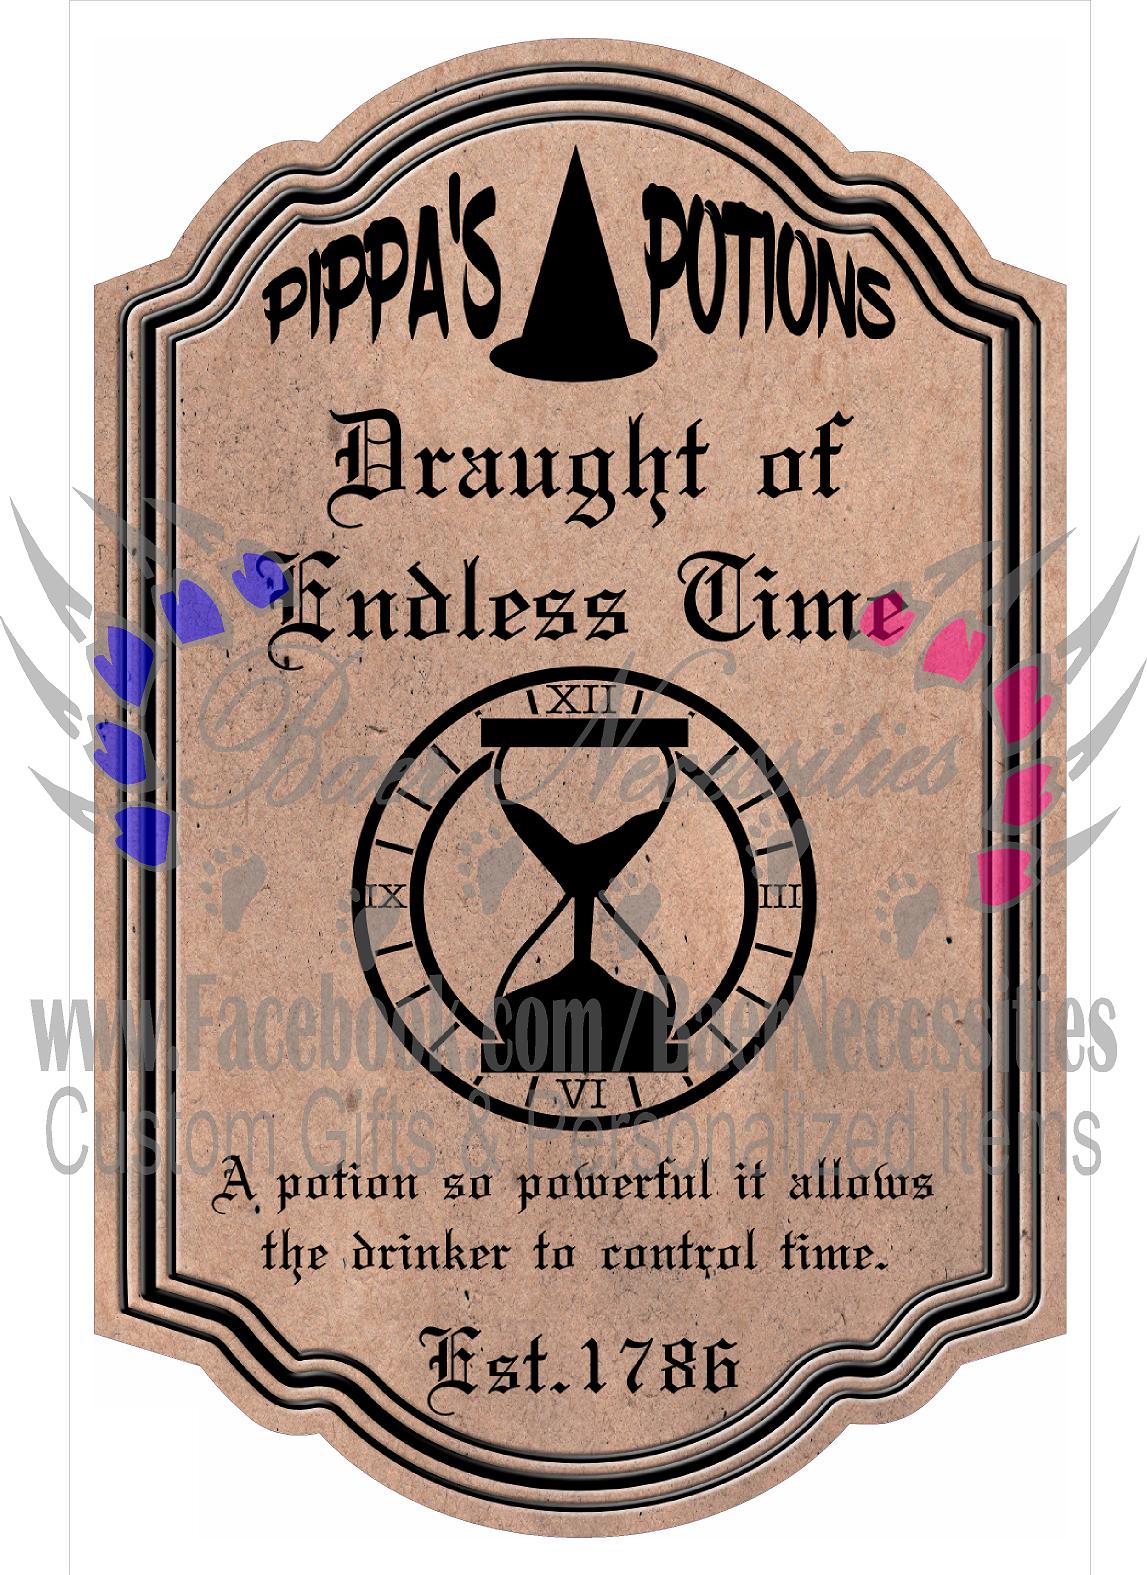 Draught of Endless Time Potion Label - Tumber Decal